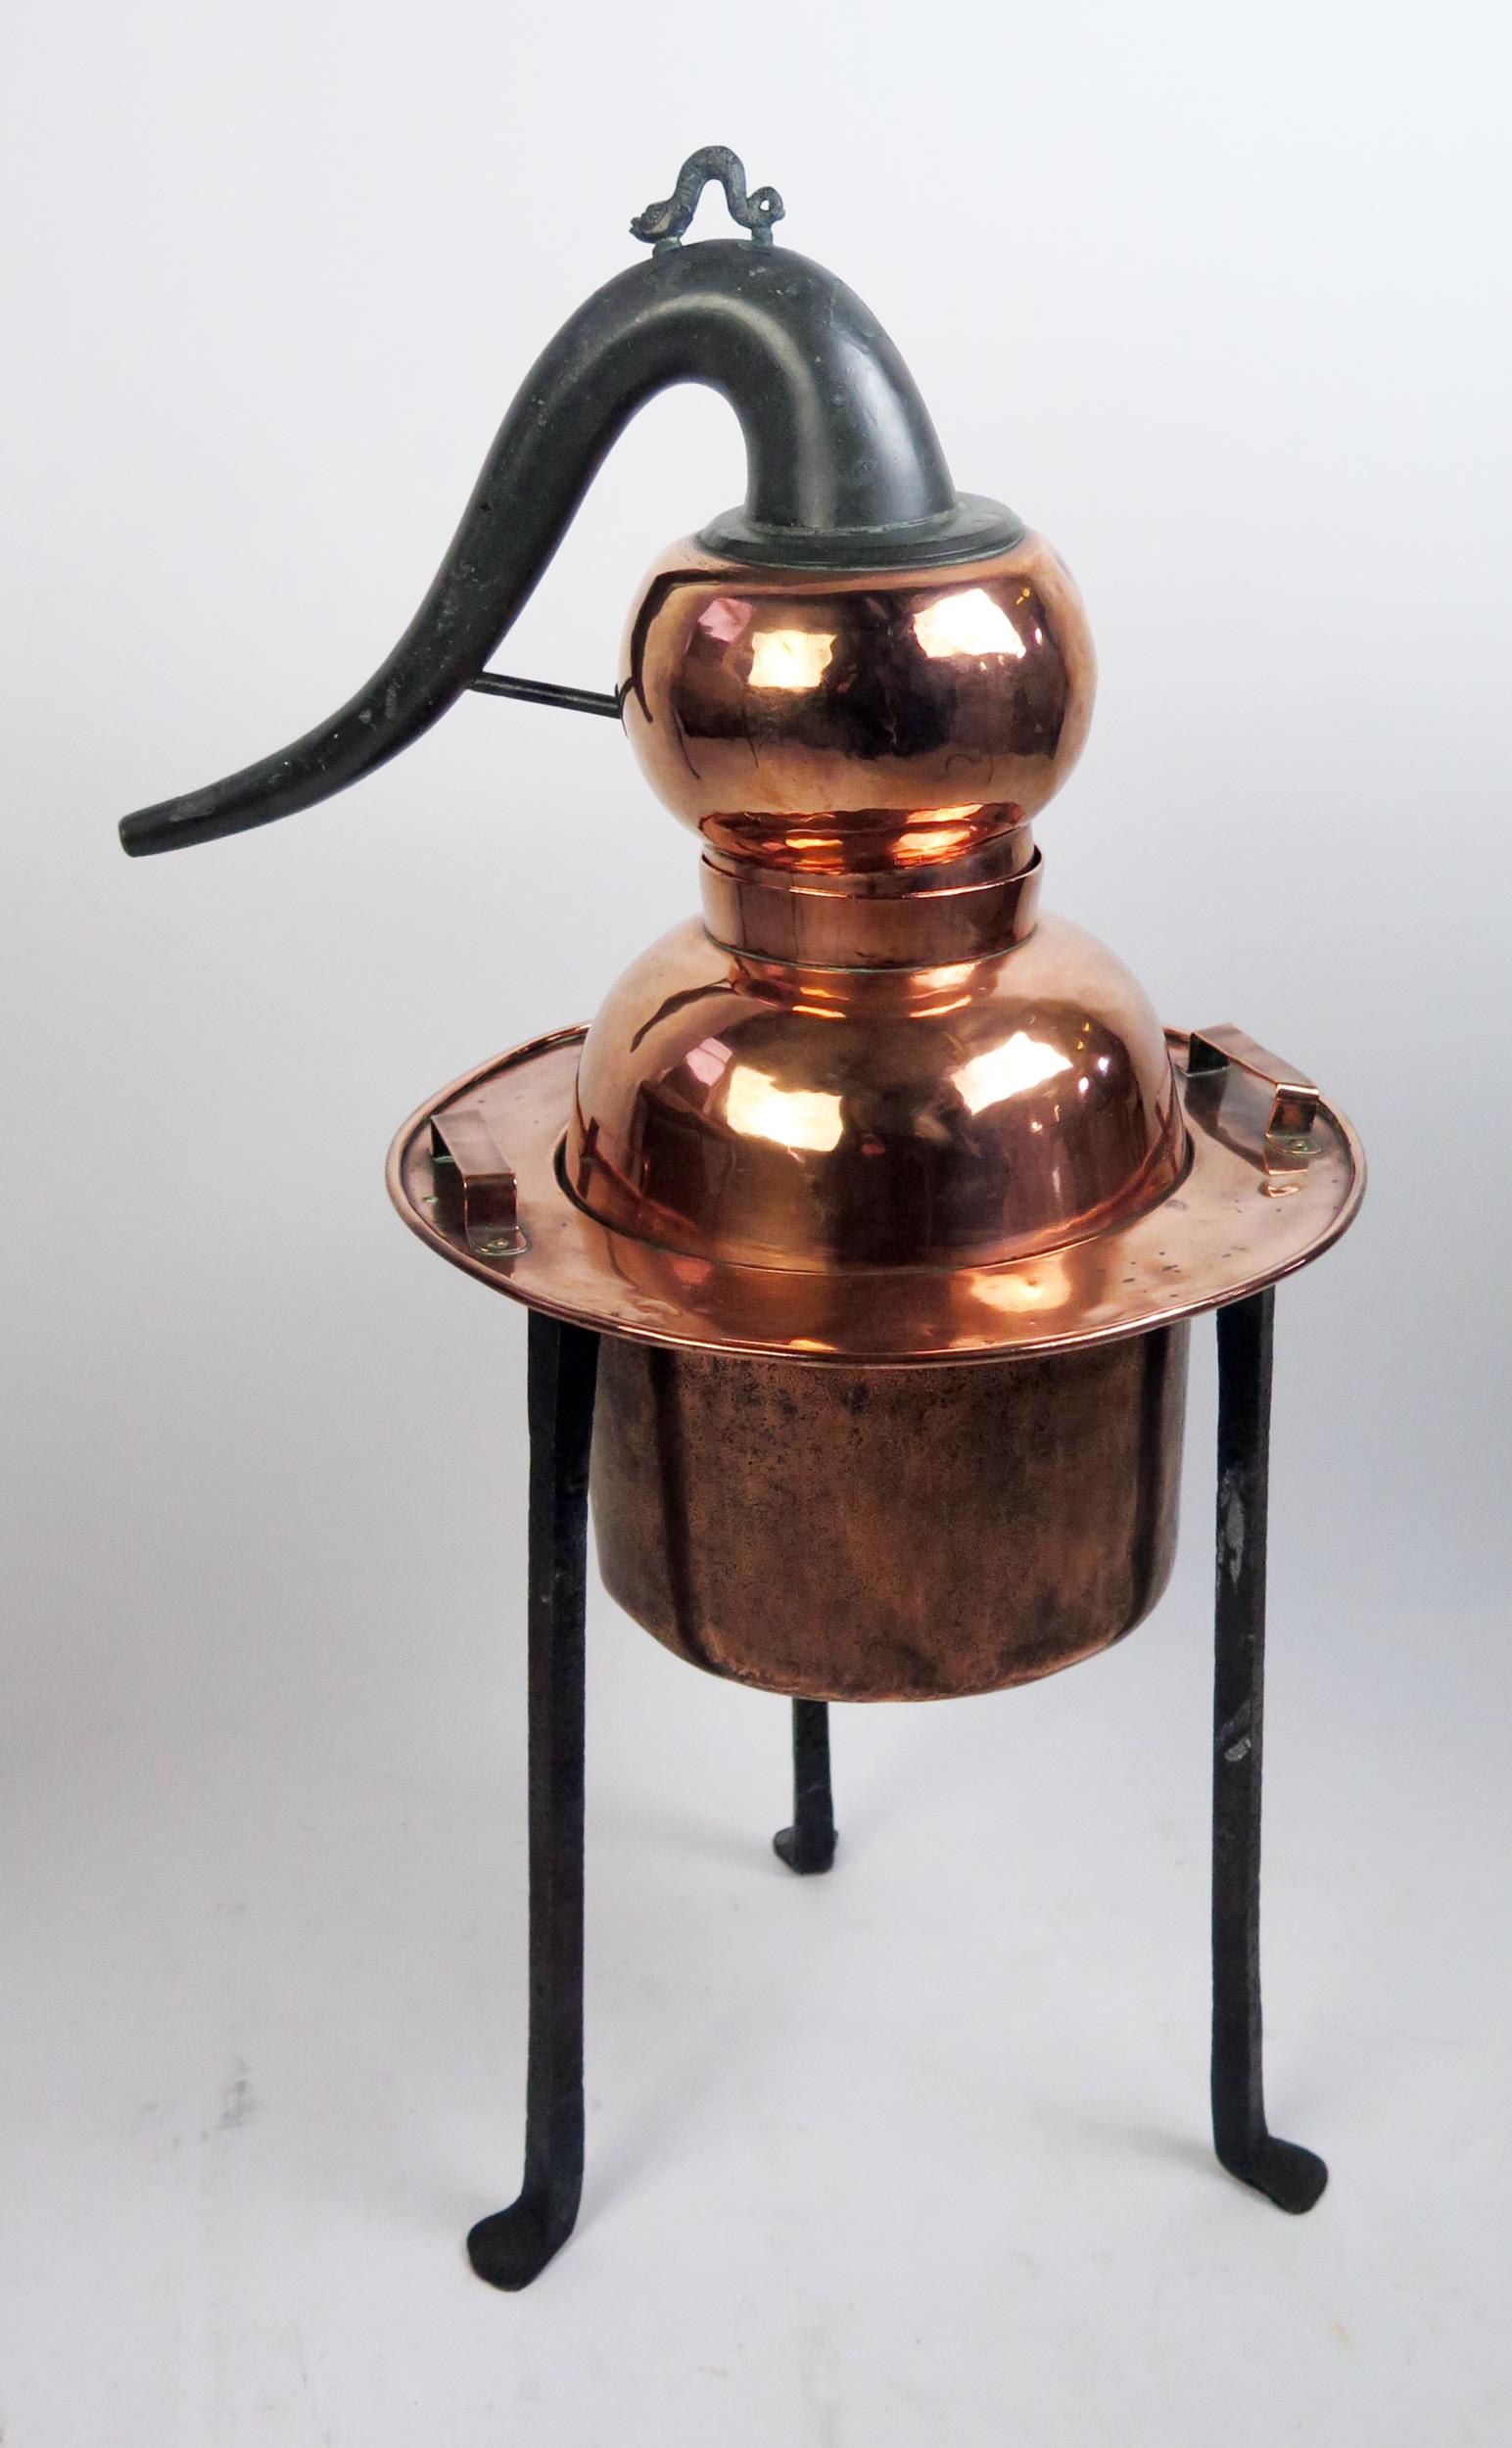 A 19th century French polished copper still, with swept metal spout, with cylindrical reservoir, - Image 2 of 4